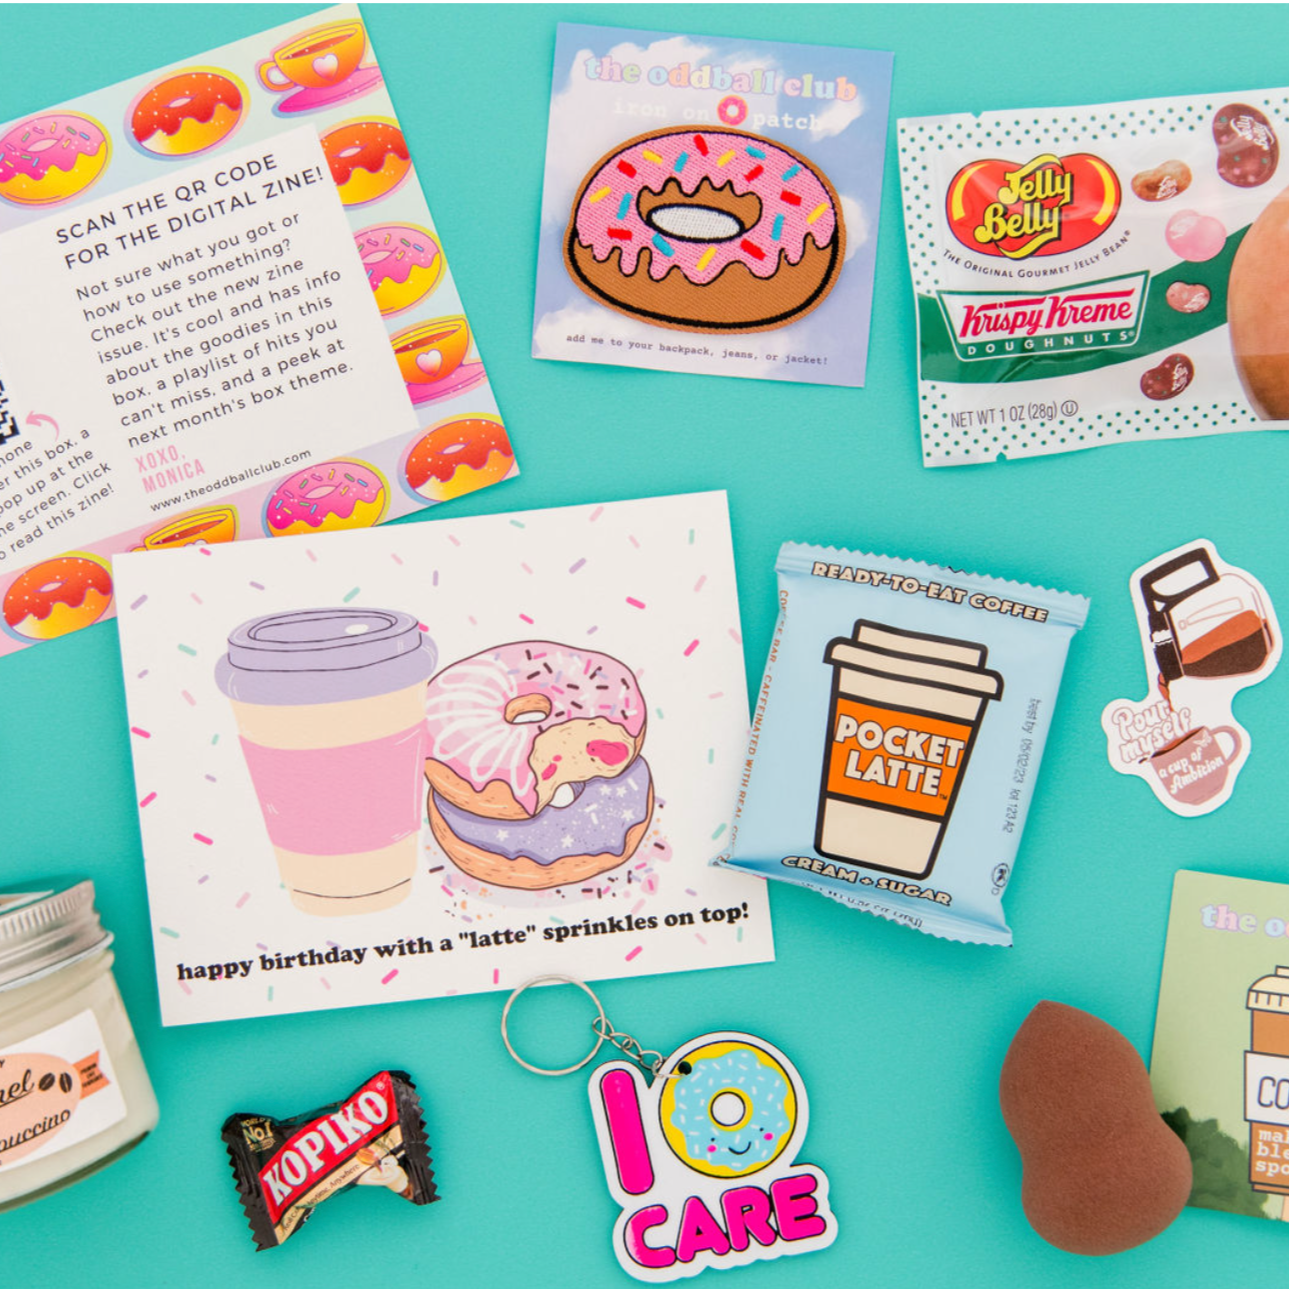 Image of a donut patch and flavored jelly beans, pocket latte chocolate, donut and coffee greeting card, I donut care key chain, Kopiko candy, and a makeup sponge on a blue background. This subscription box is perfect for donut and coffee lovers. Get your sweet fix with our tasty treats and cute accessories. Order now and enjoy your monthly surprise from our team at The Oddball Club.